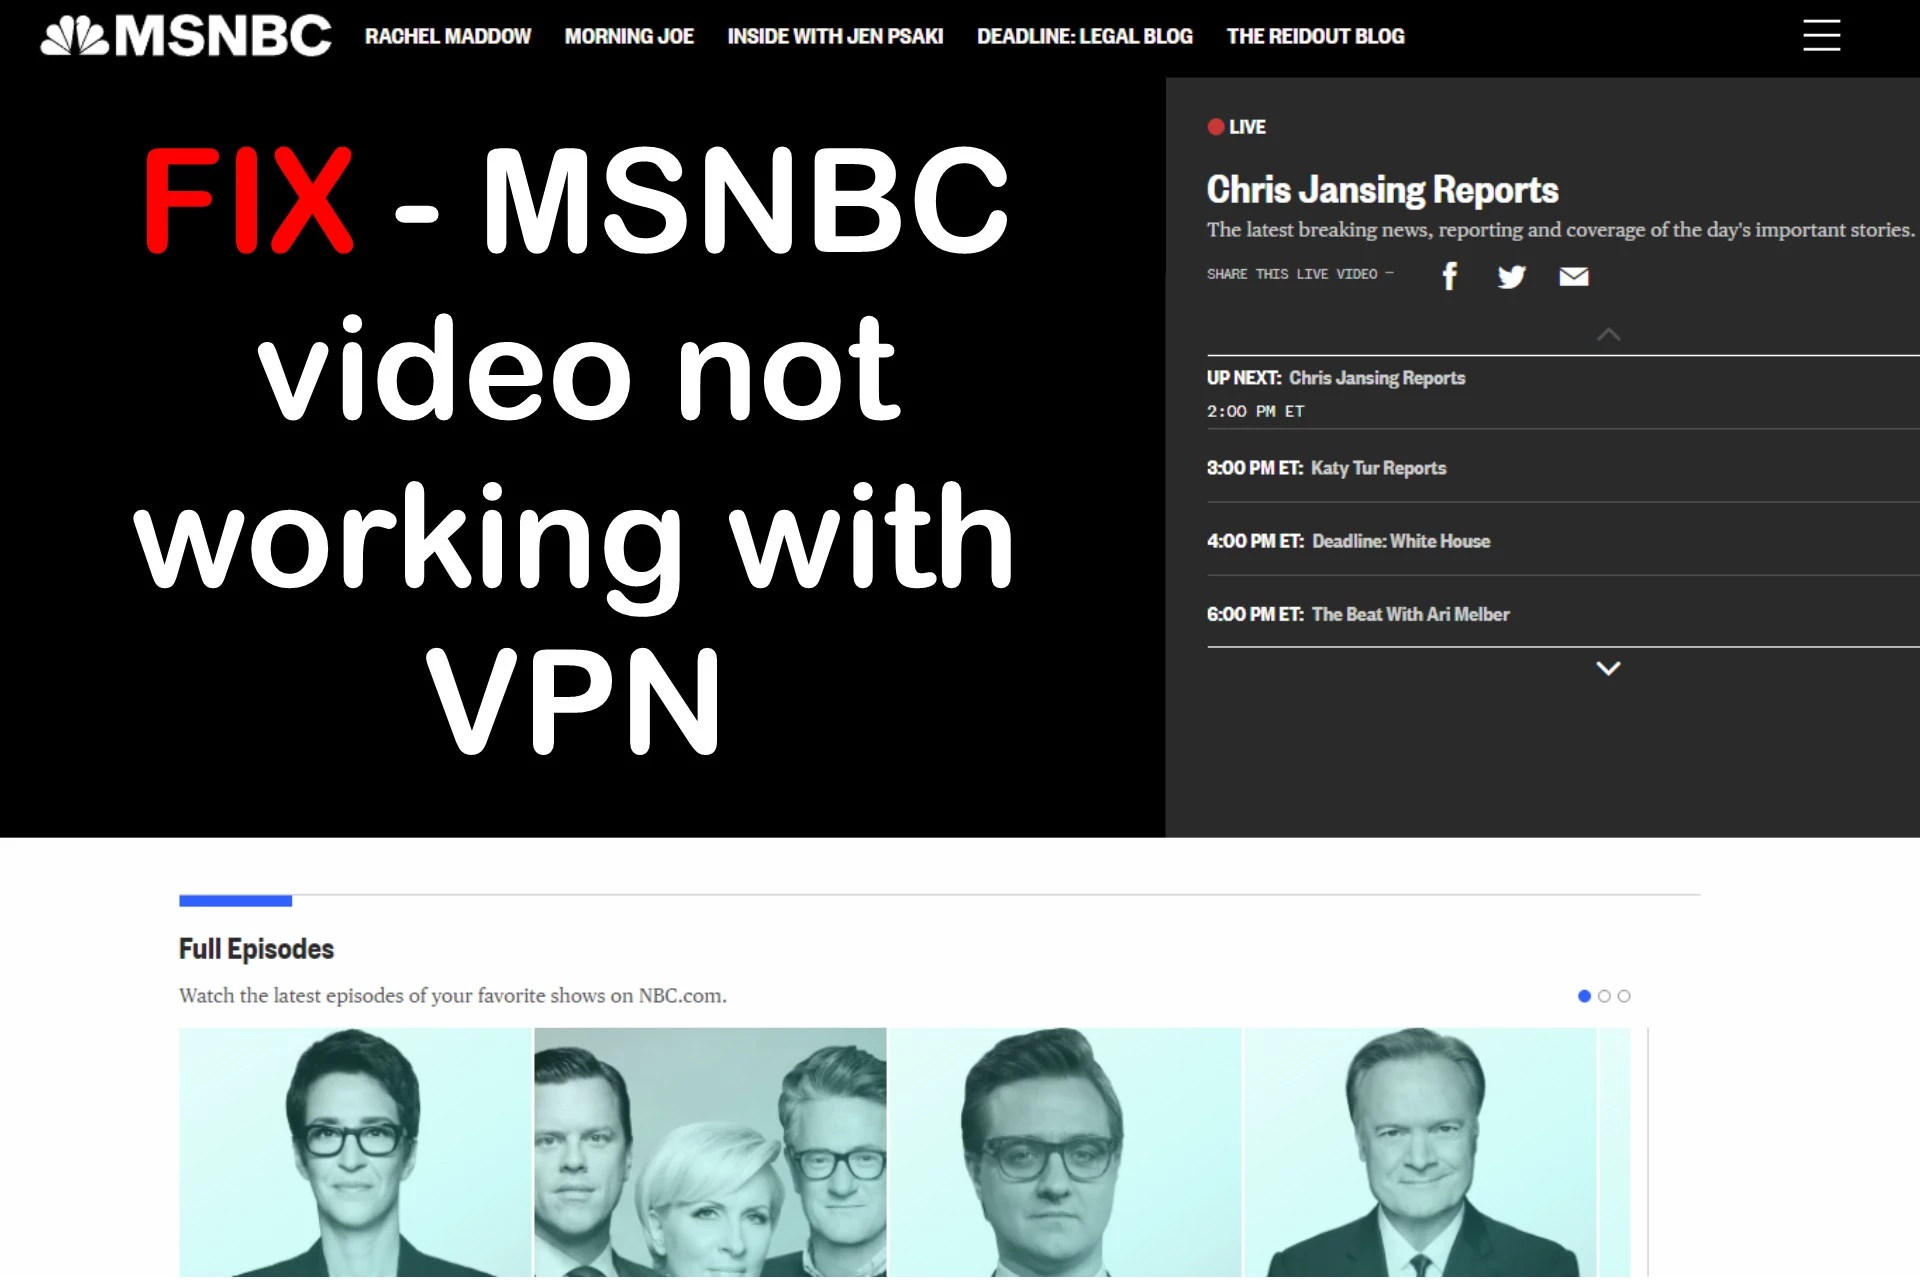 MSNBC video not working with VPN